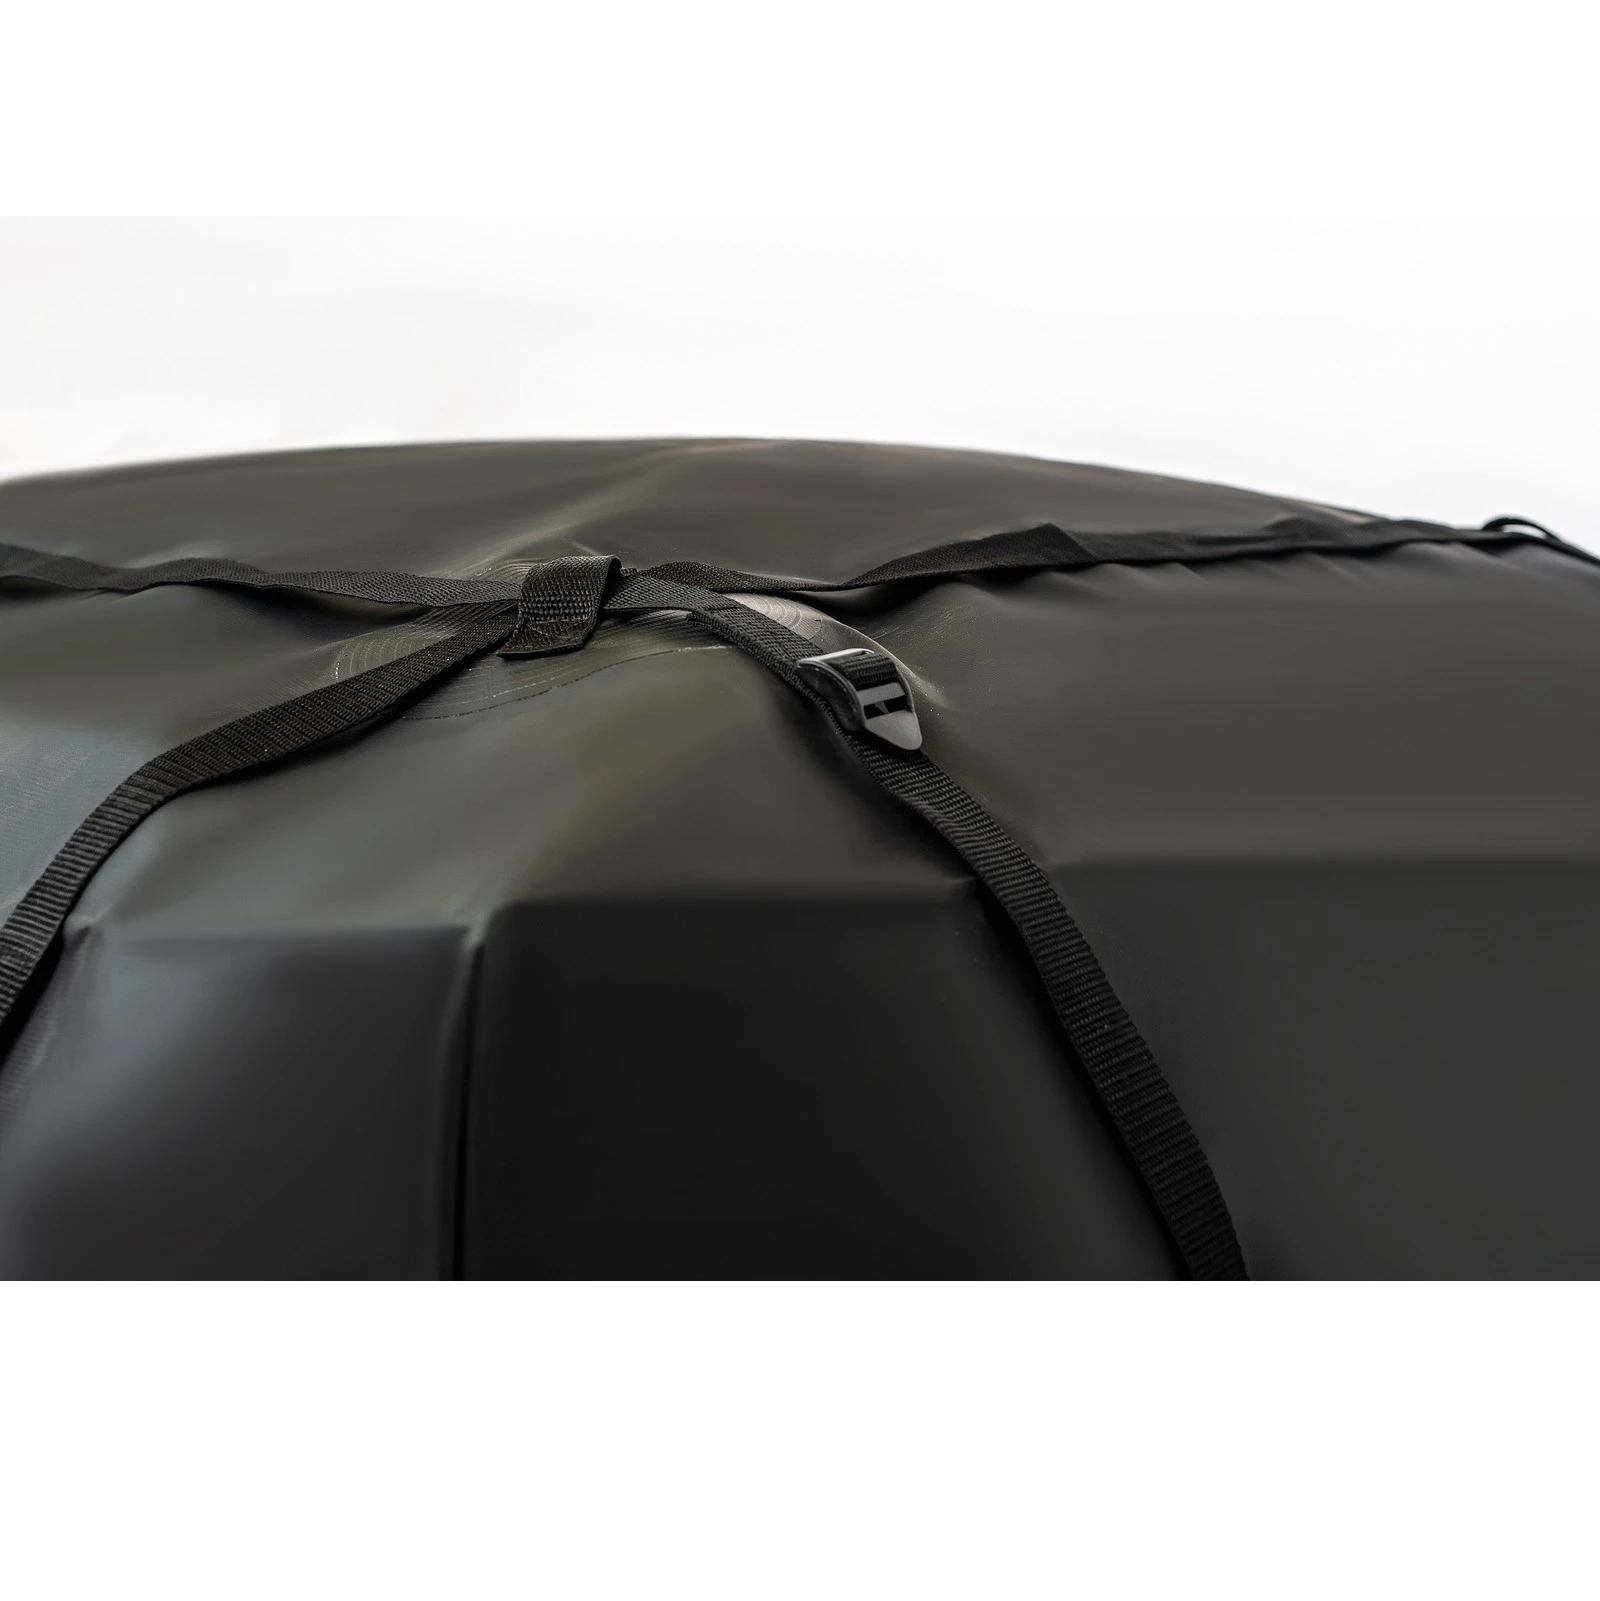 Wholesale Quality Car Top Bag Soft-Sided Rain Proof Bag, Waterproof Car Accessories Contact us for Best Price